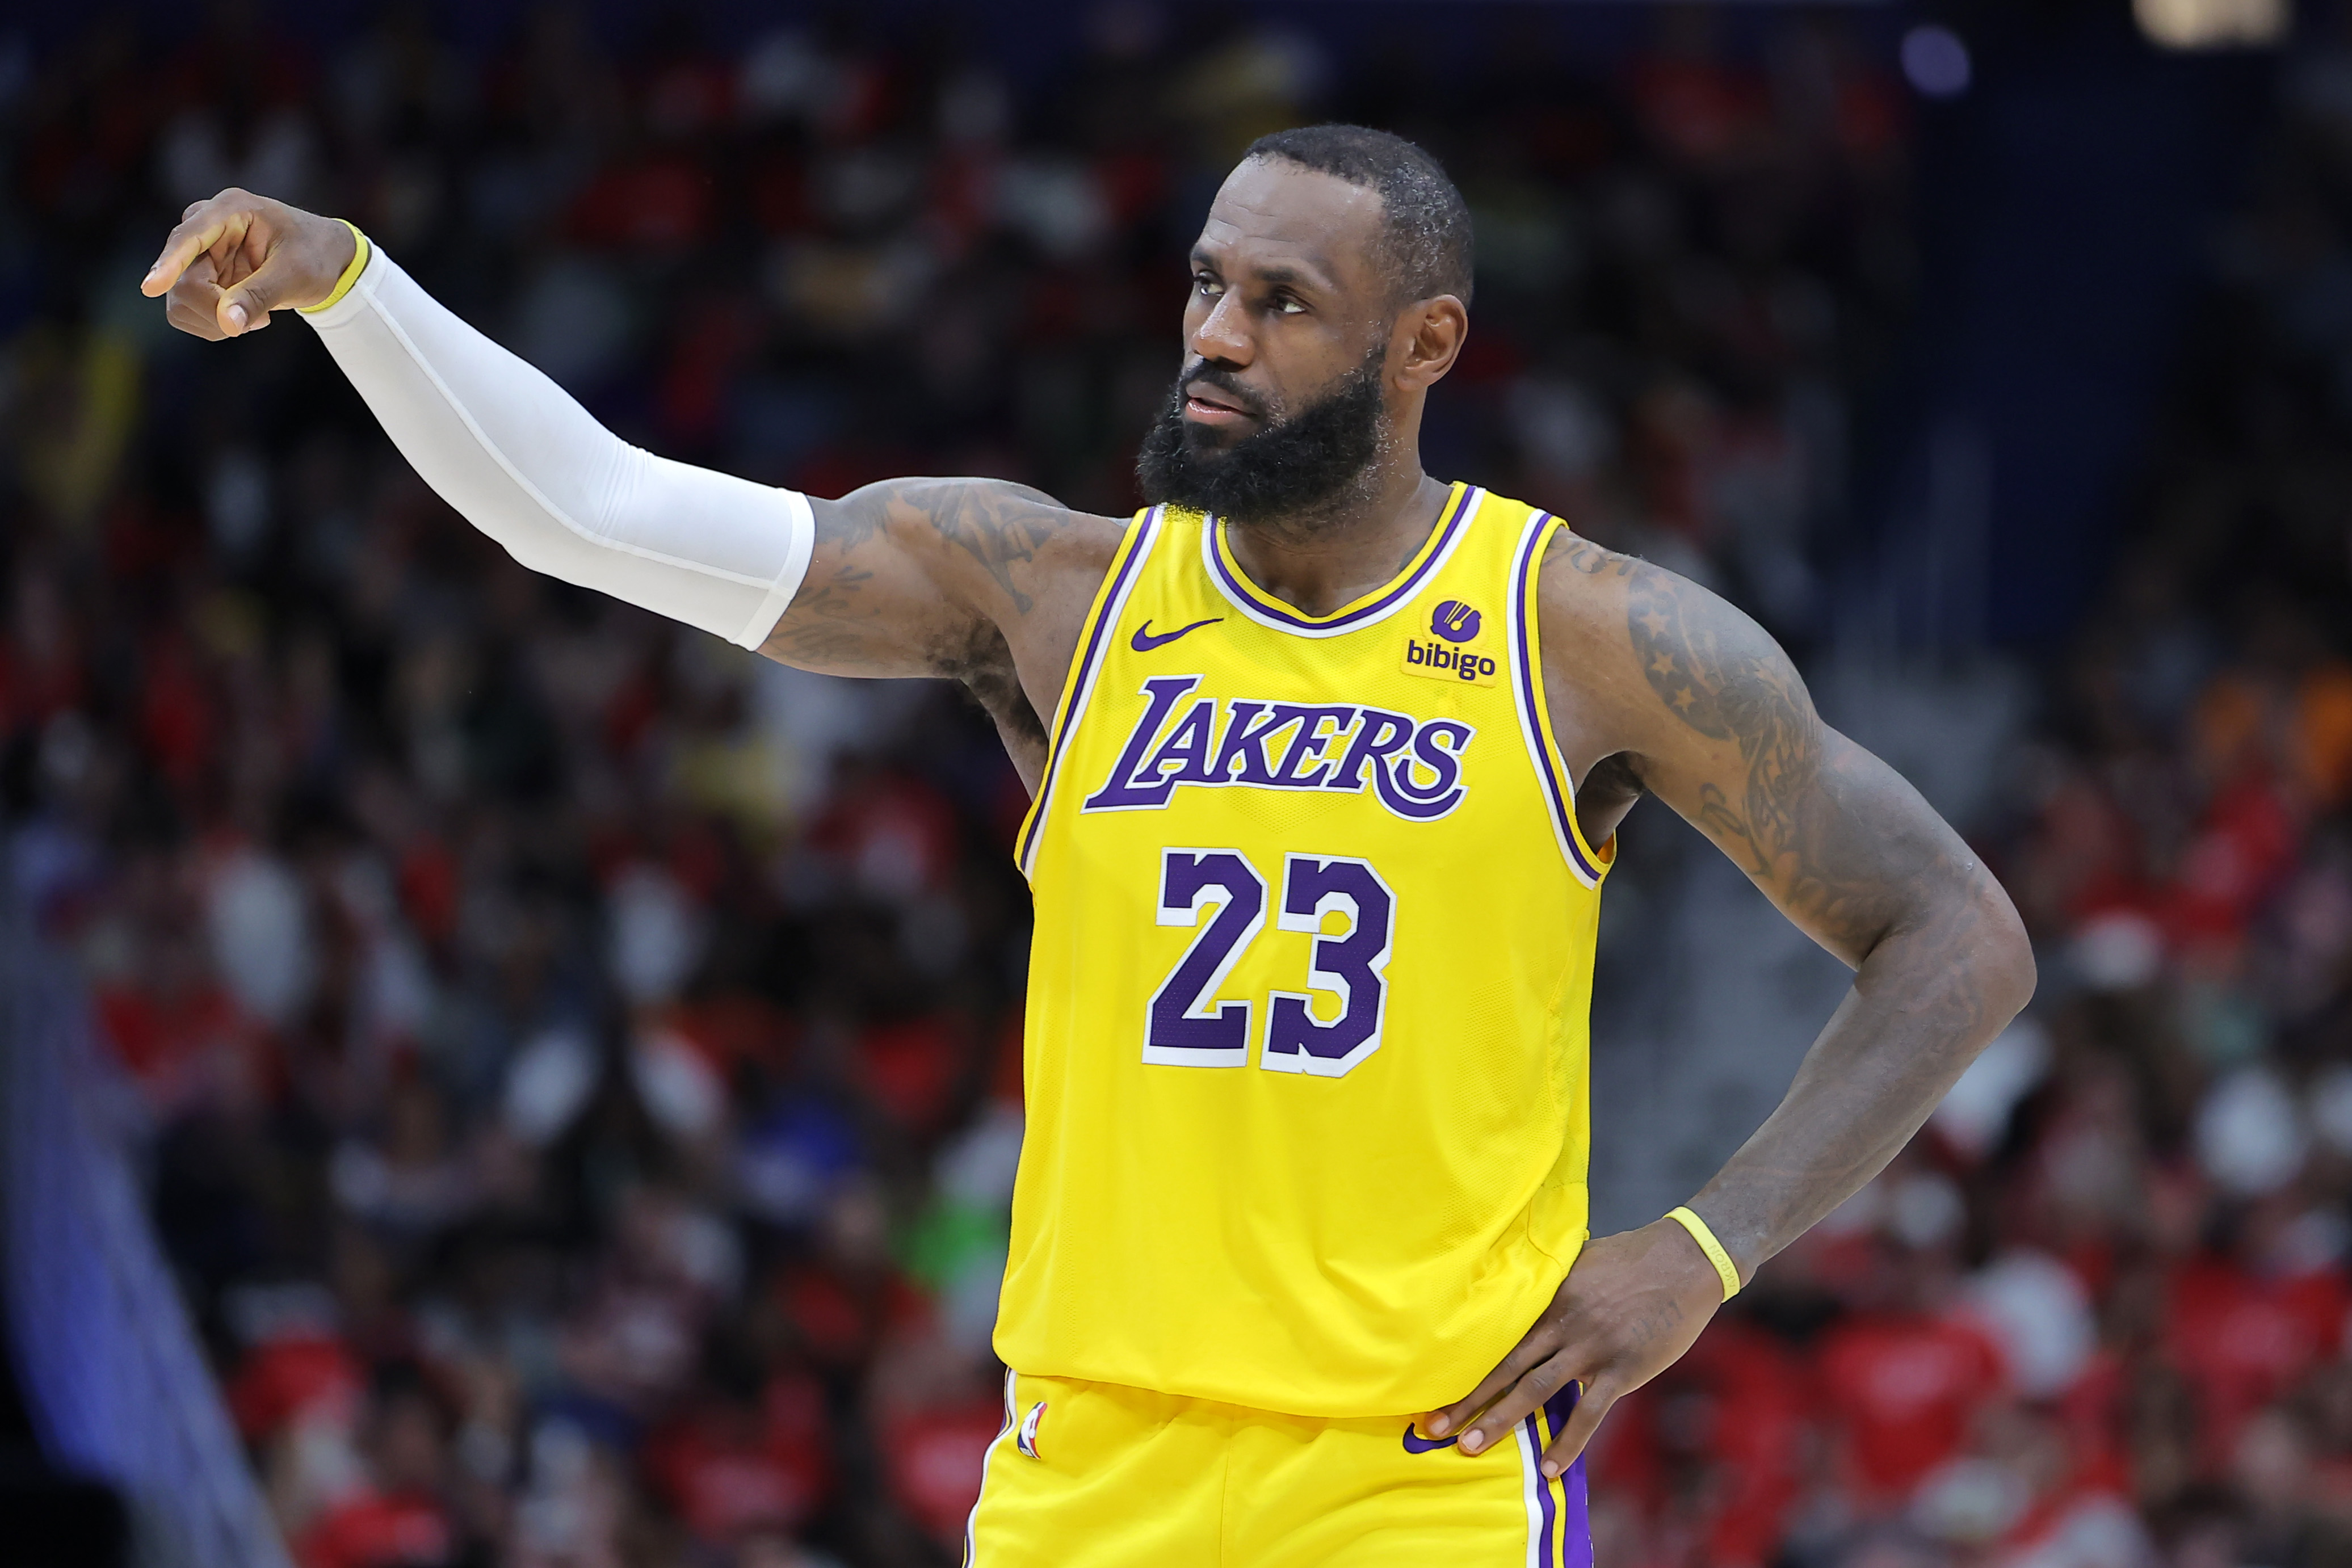 Smith shared his opinion as James and the No. 7 seed Los Angeles Lakers will have the tough task of going up against the No. 2 seed Denver Nuggets in the first round of the NBA playoffs